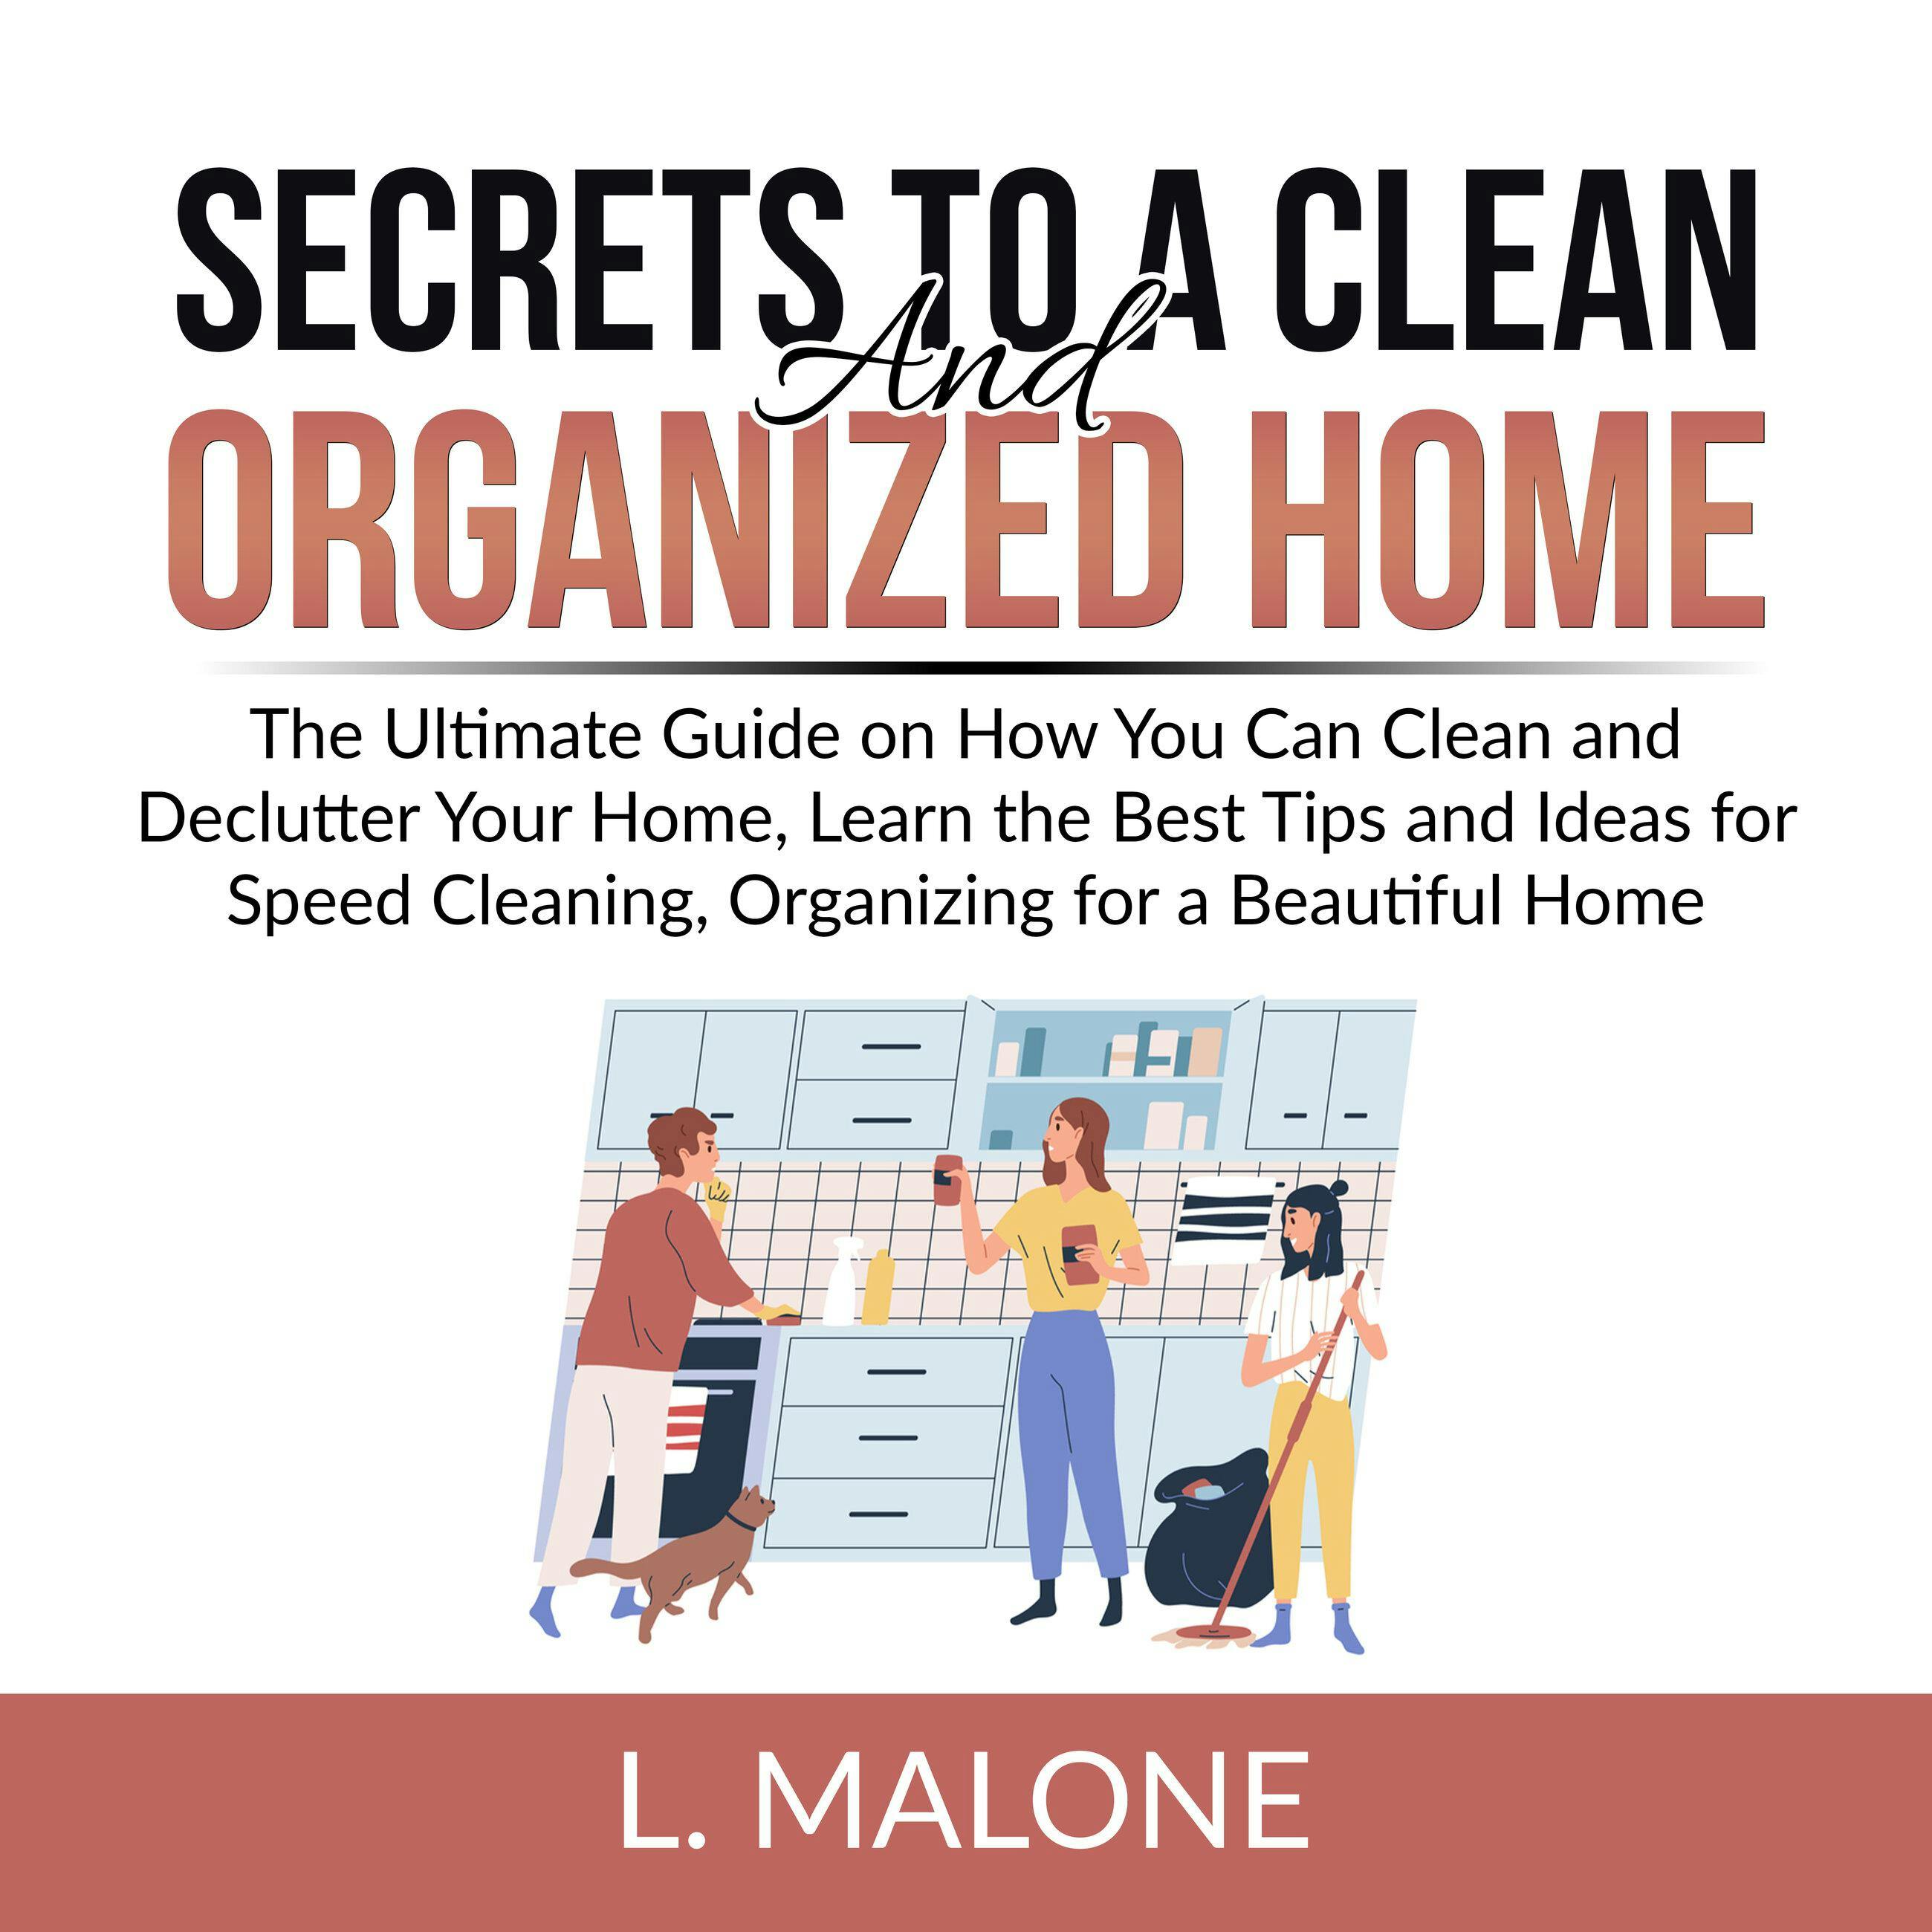 Secrets to a Clean and Organized Home: The Ultimate Guide on How You Can Clean and Declutter Your Home, Learn the Best Tips and Ideas for Speed Cleaning, Organizing for a Beautiful Home - undefined